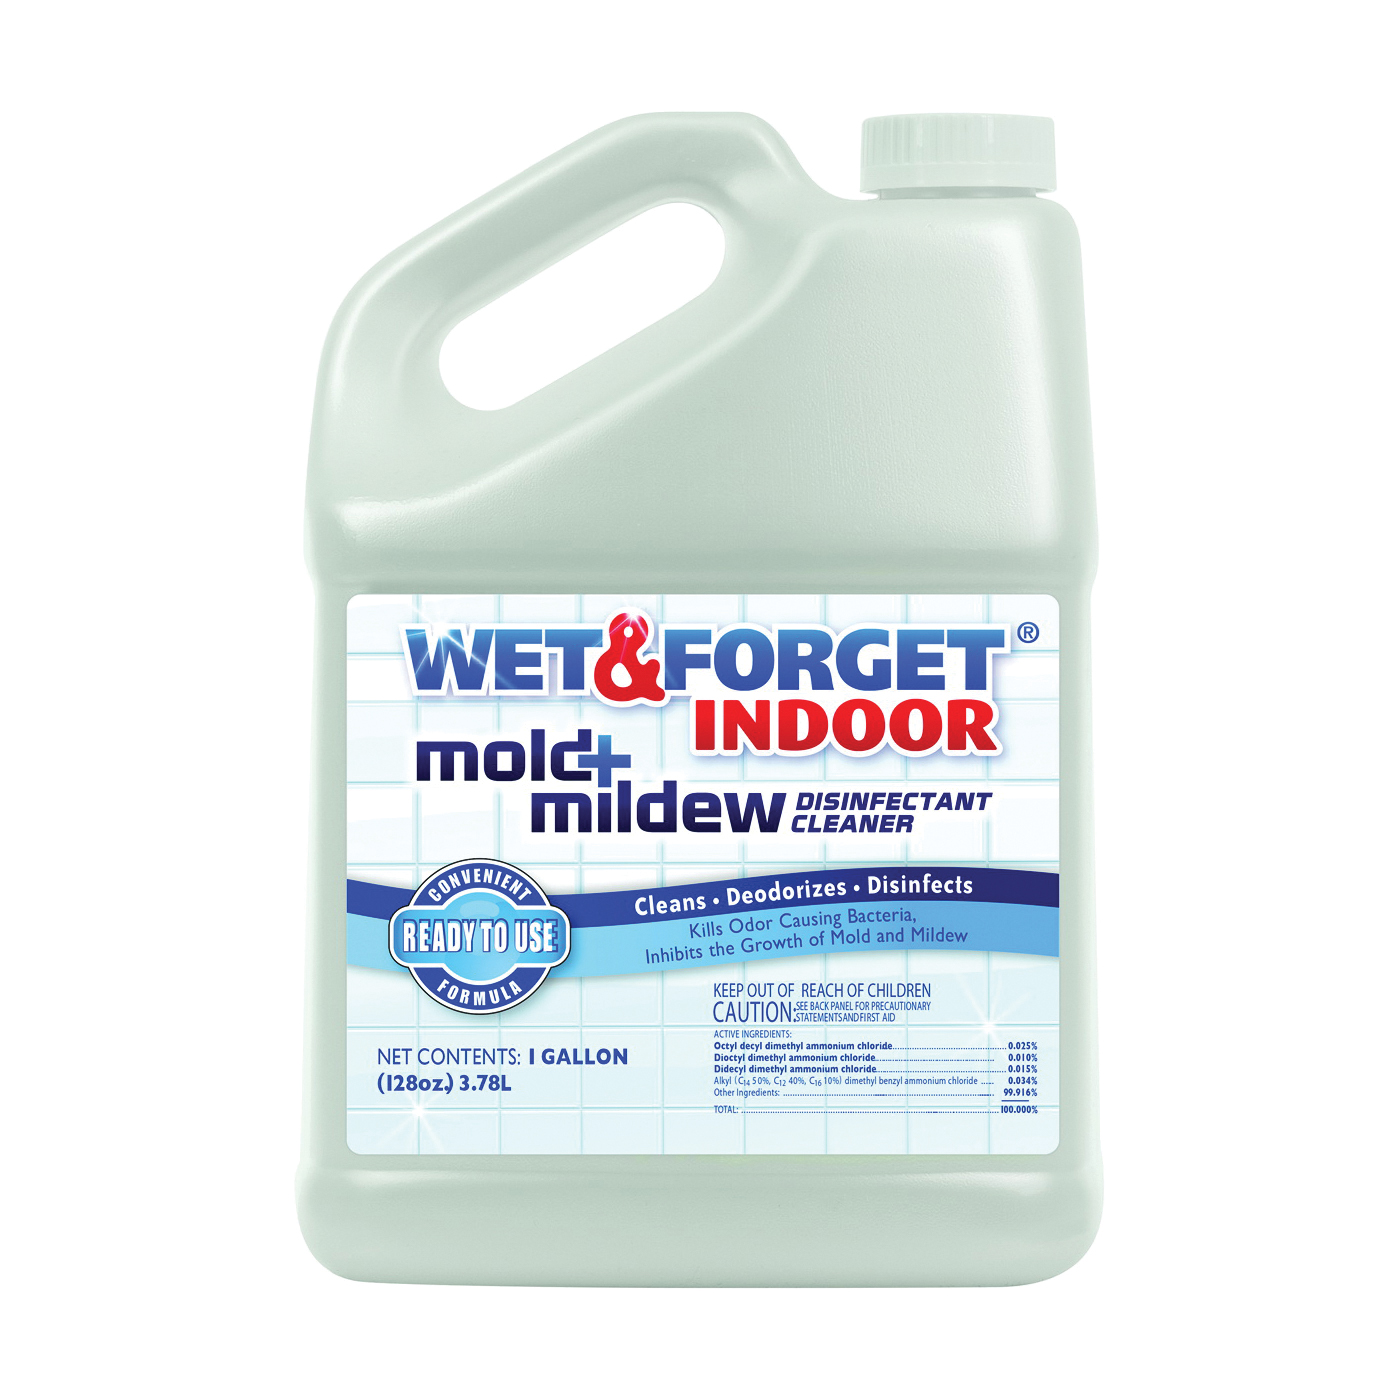 802128 Mold and Mildew Disinfectant Cleaner, 128 oz, Liquid, Bland, Clear